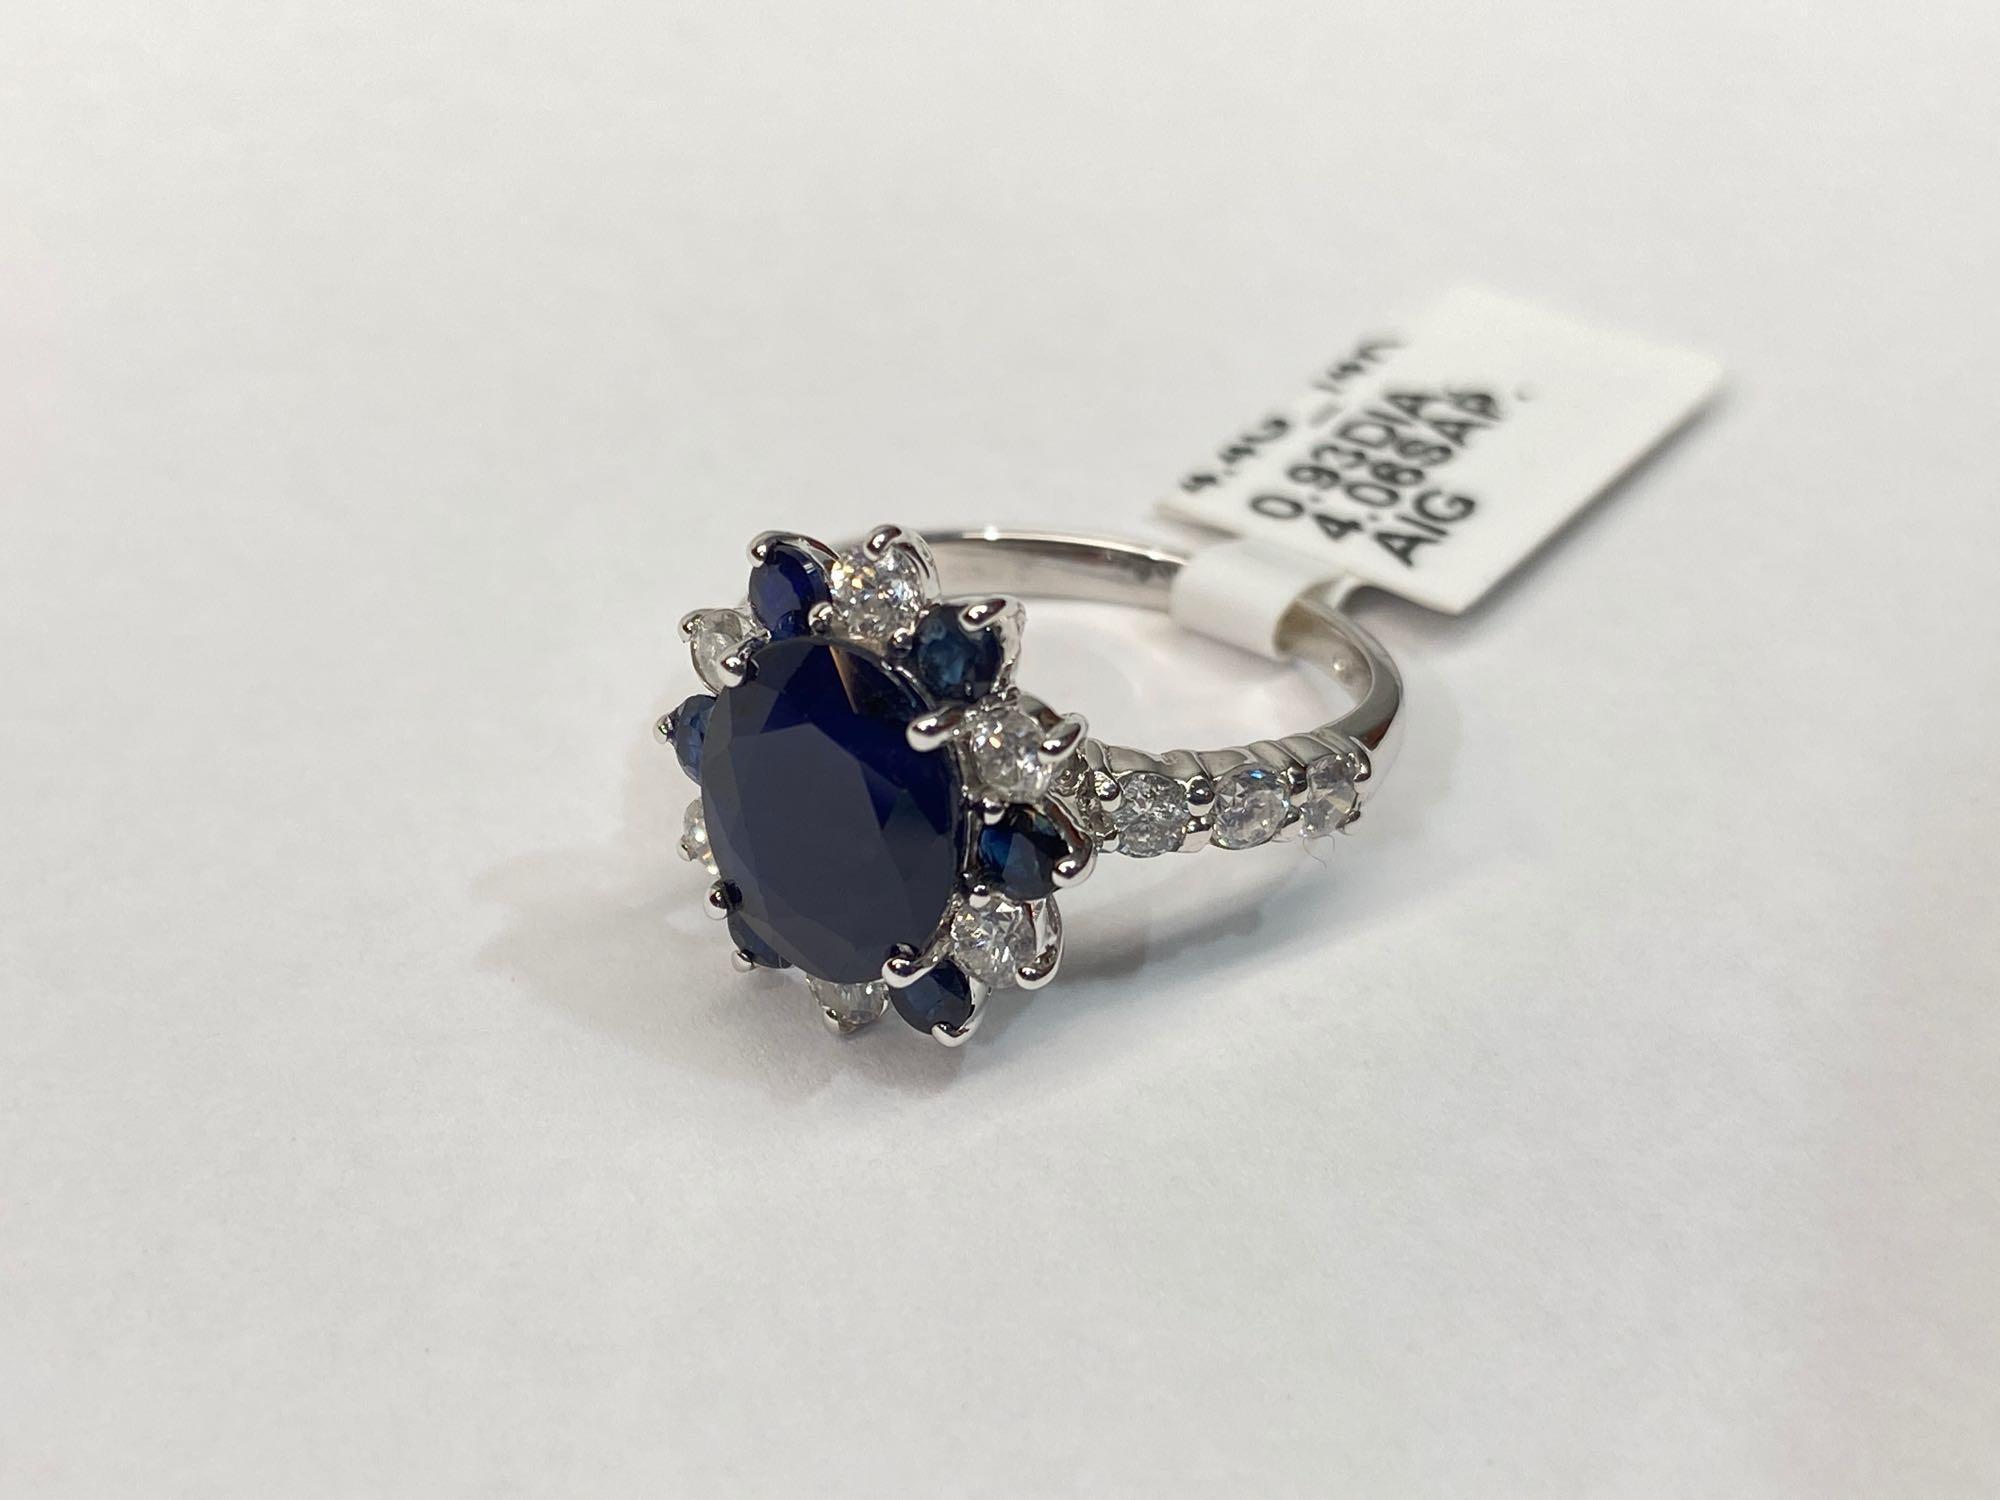 4.06ct Sapphires, 0.93cts Diamonds, 14K White Gold Ring, Size 7, Certified & Graded by AIG